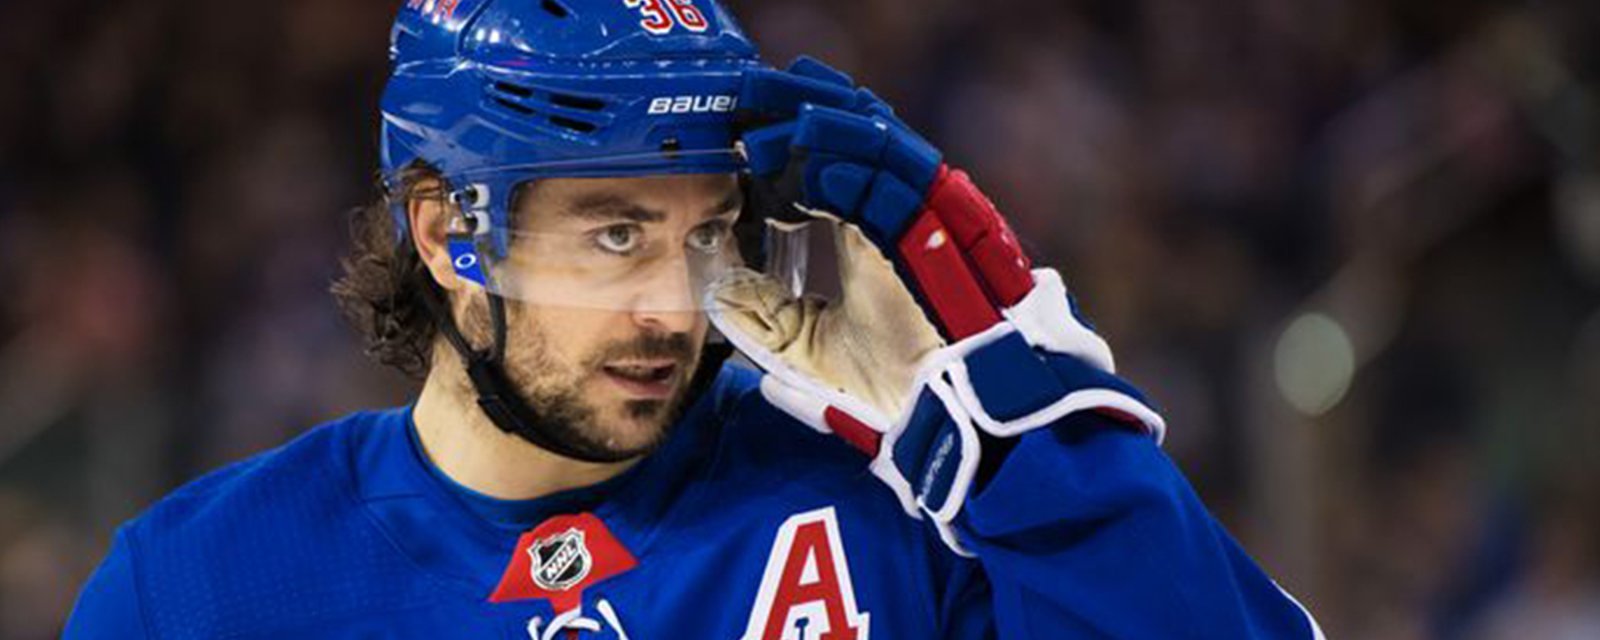 Rangers’ Zuccarello says he’s “sitting alone and waiting” to be traded